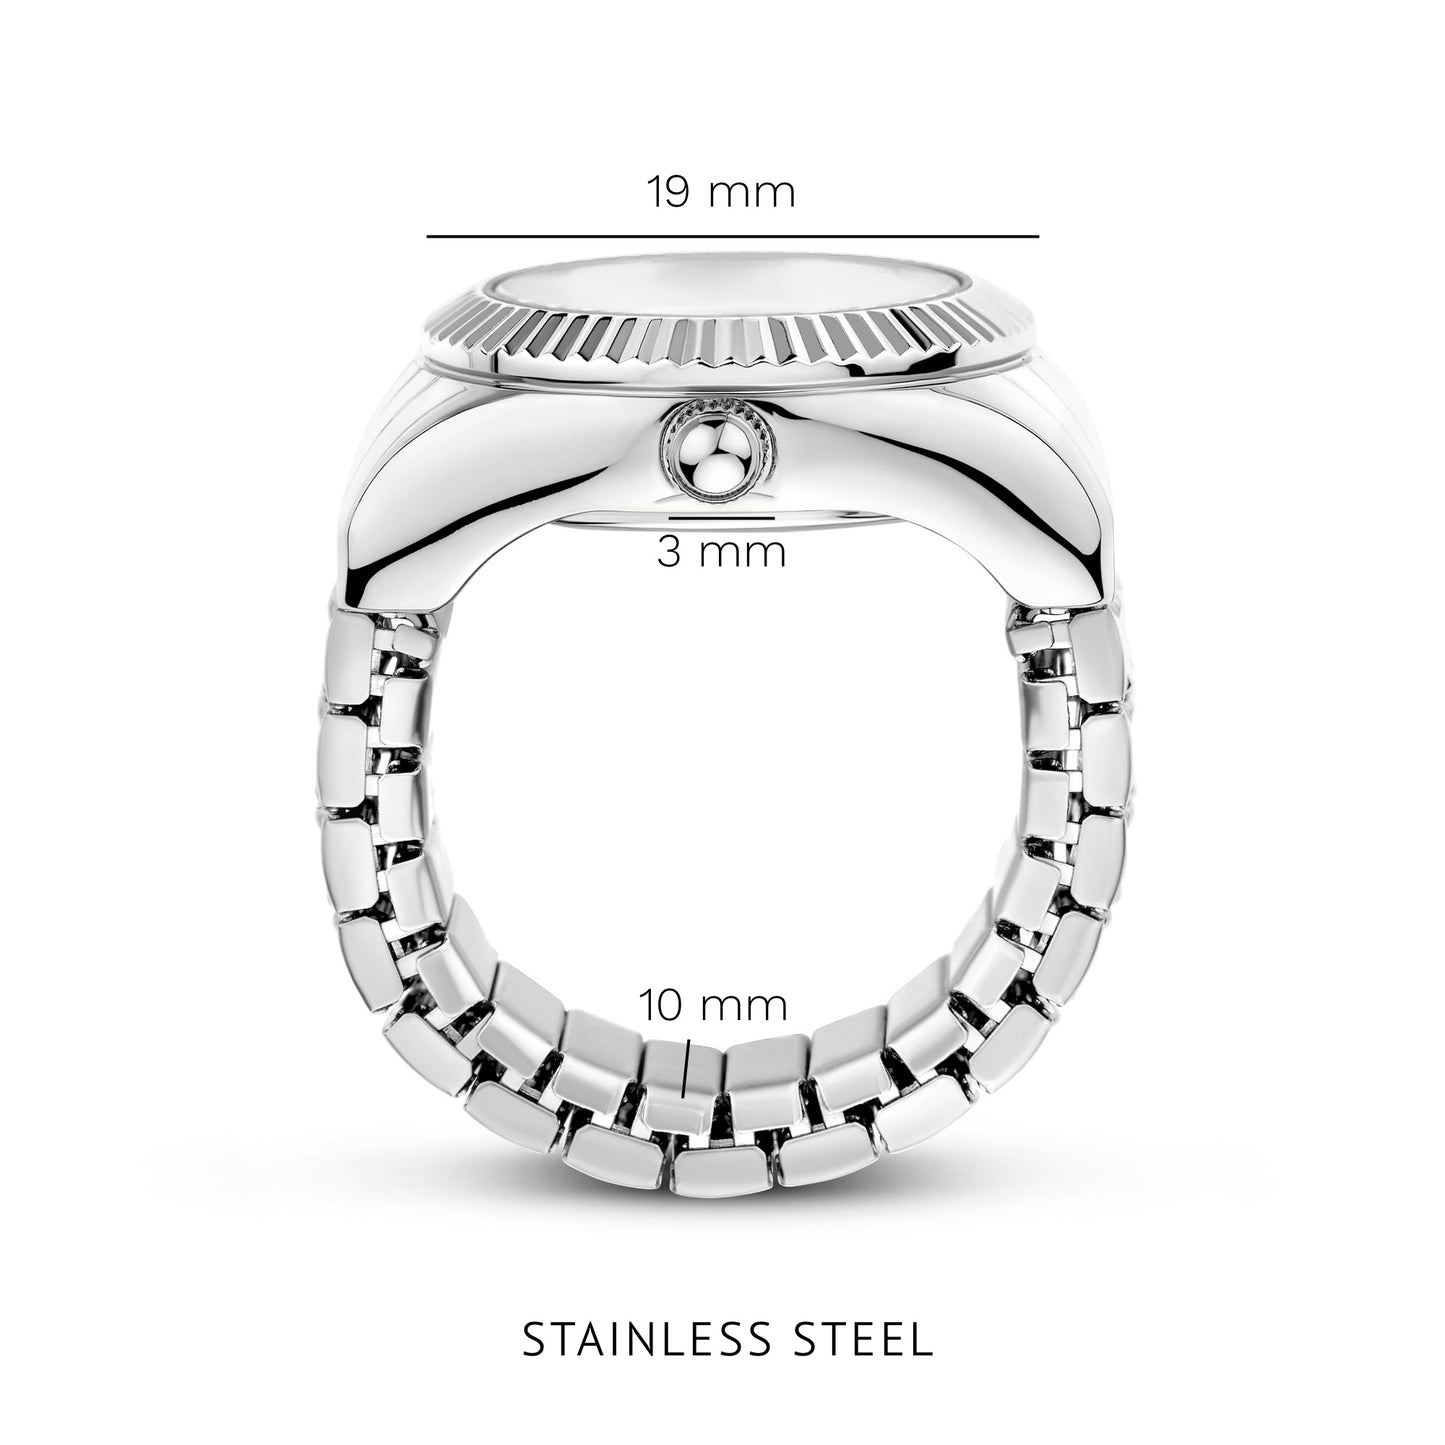 Sunrise silver coloured watch ring